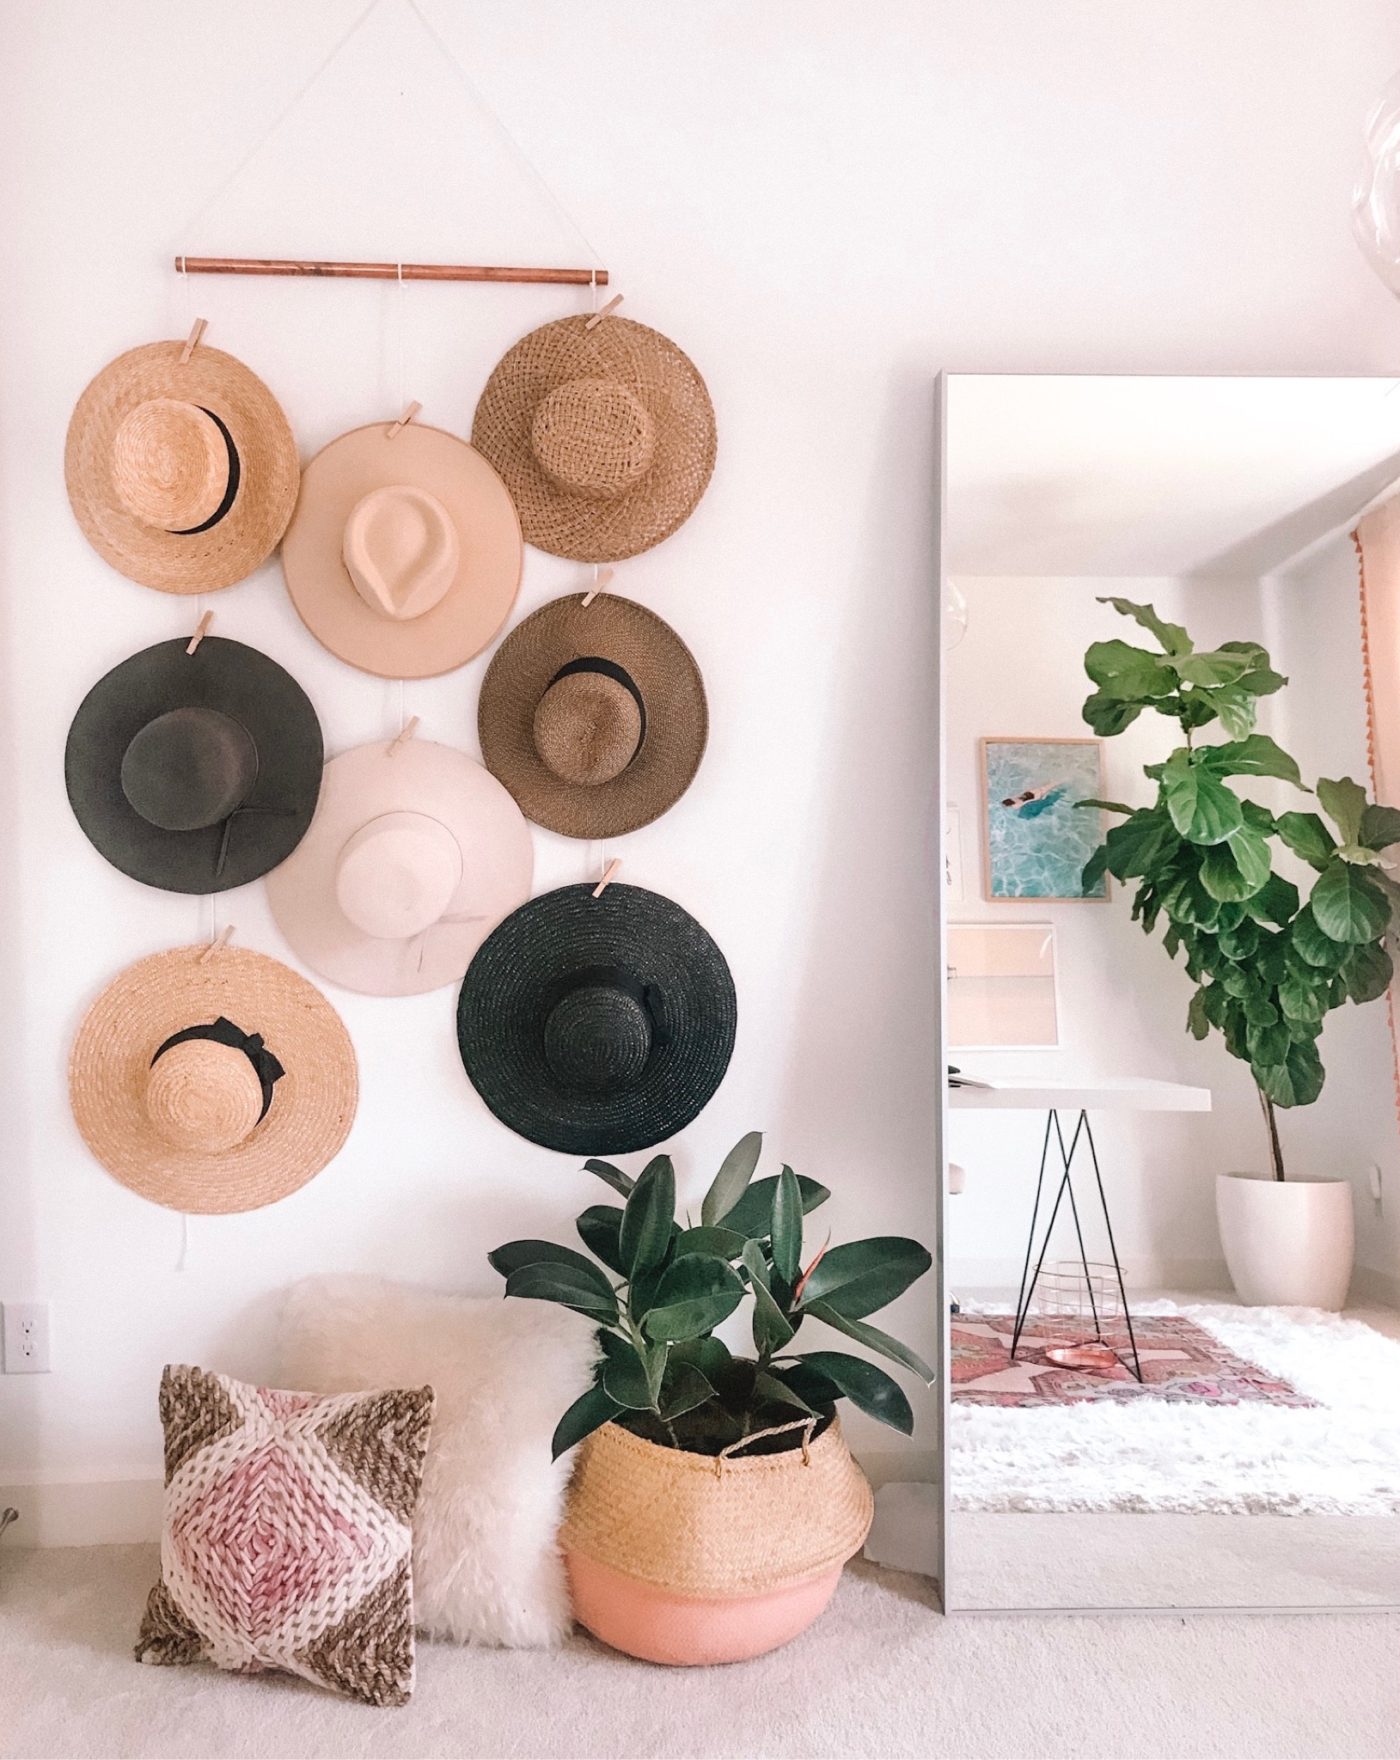 DIY Hat Wall How-To, 51% OFF